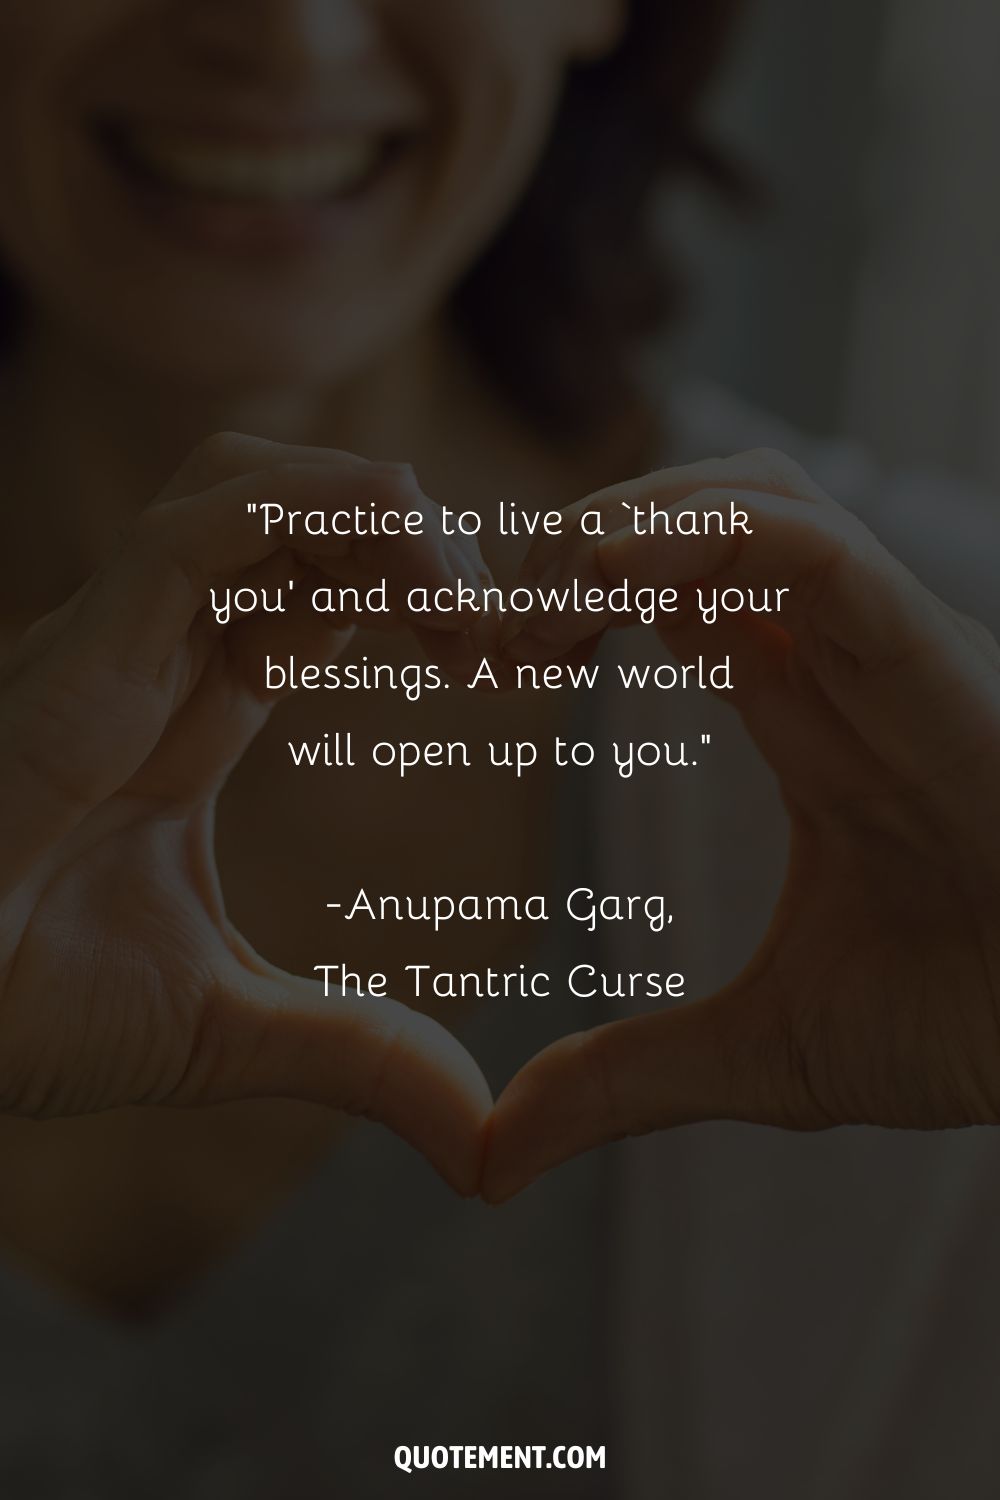 Practice to live a ‘thank you’ and acknowledge your blessings